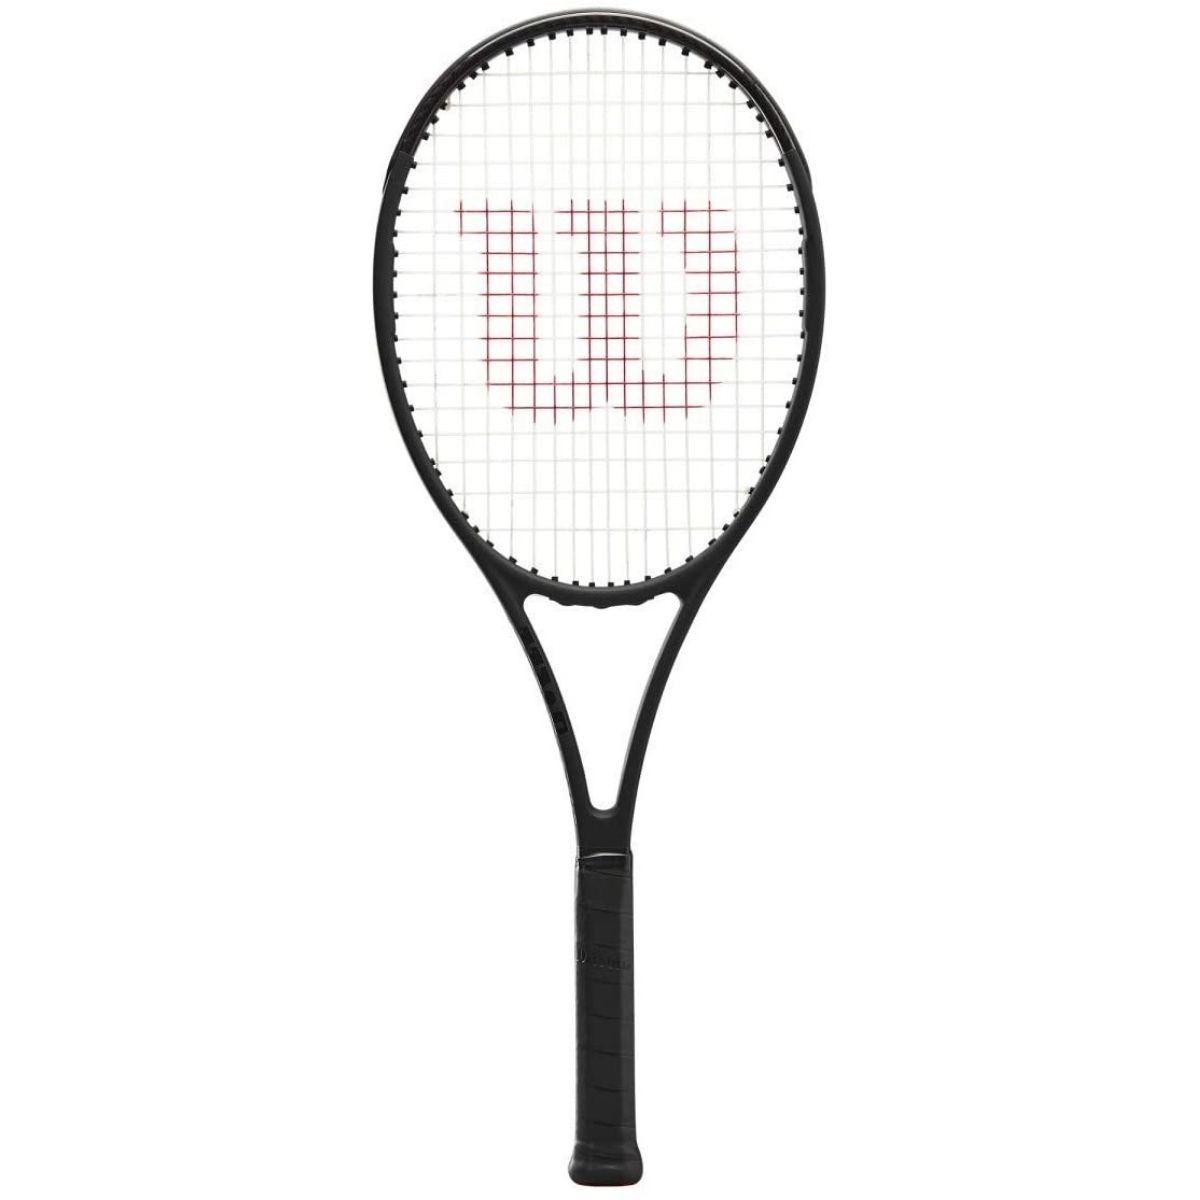 The Best Tennis Rackets for Intermediate Players Options: WILSON Pro Staff 97